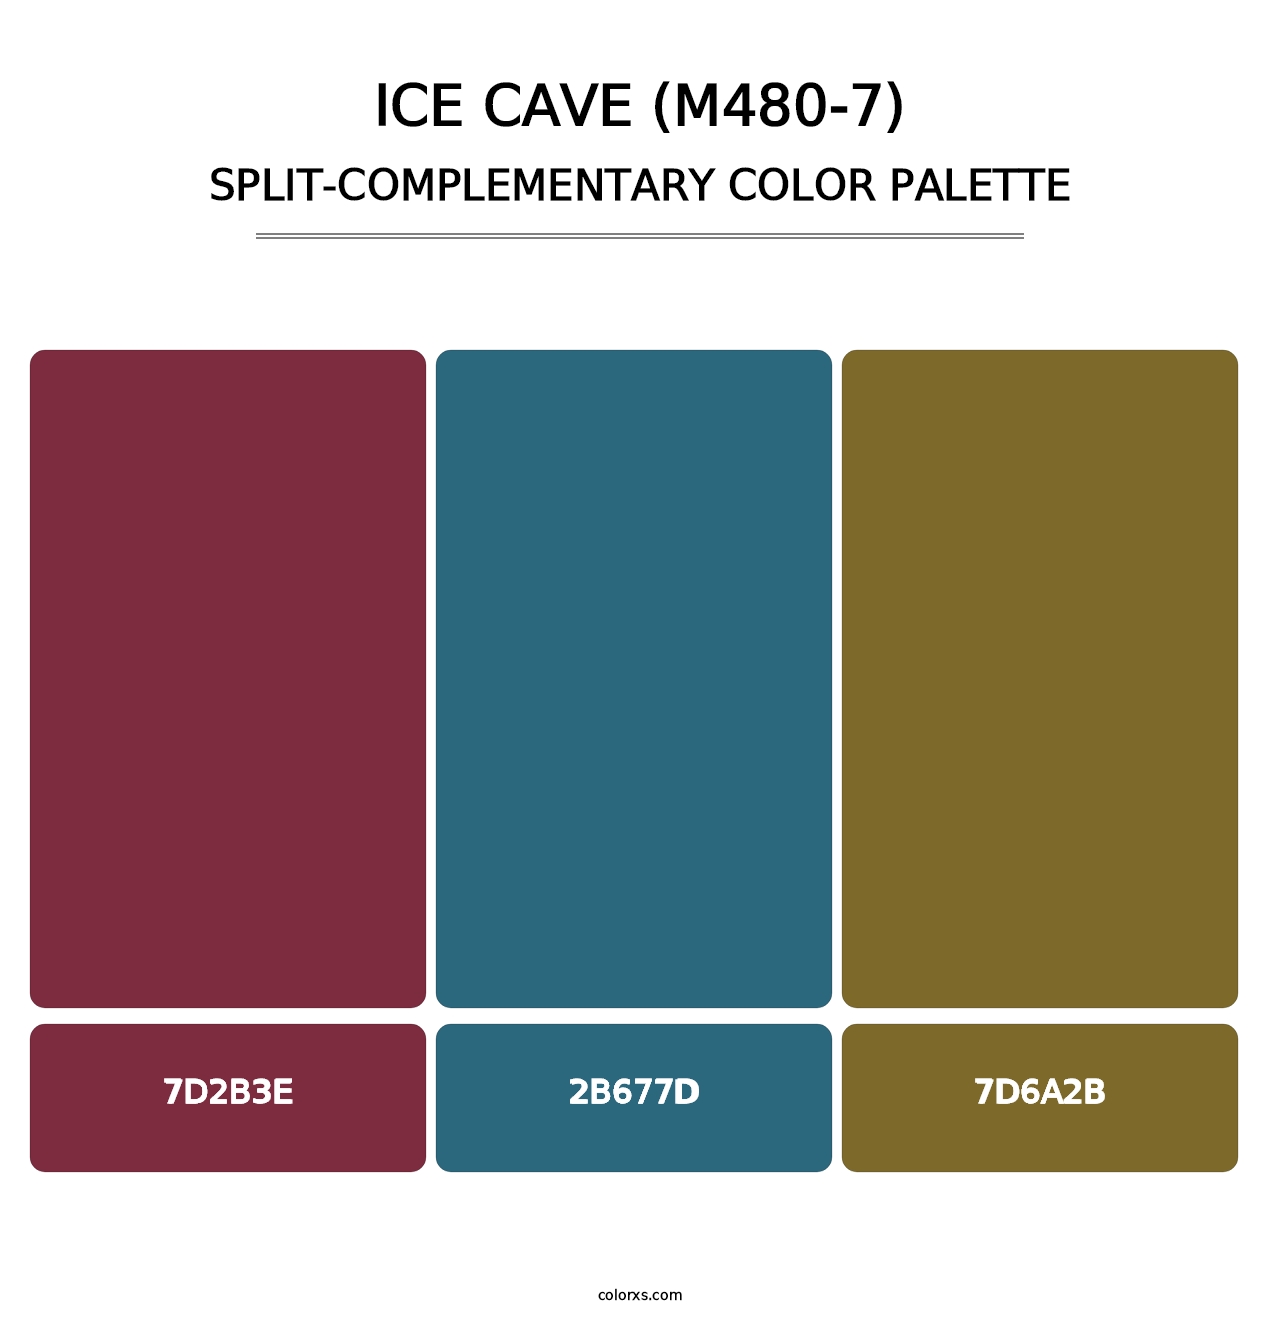 Ice Cave (M480-7) - Split-Complementary Color Palette